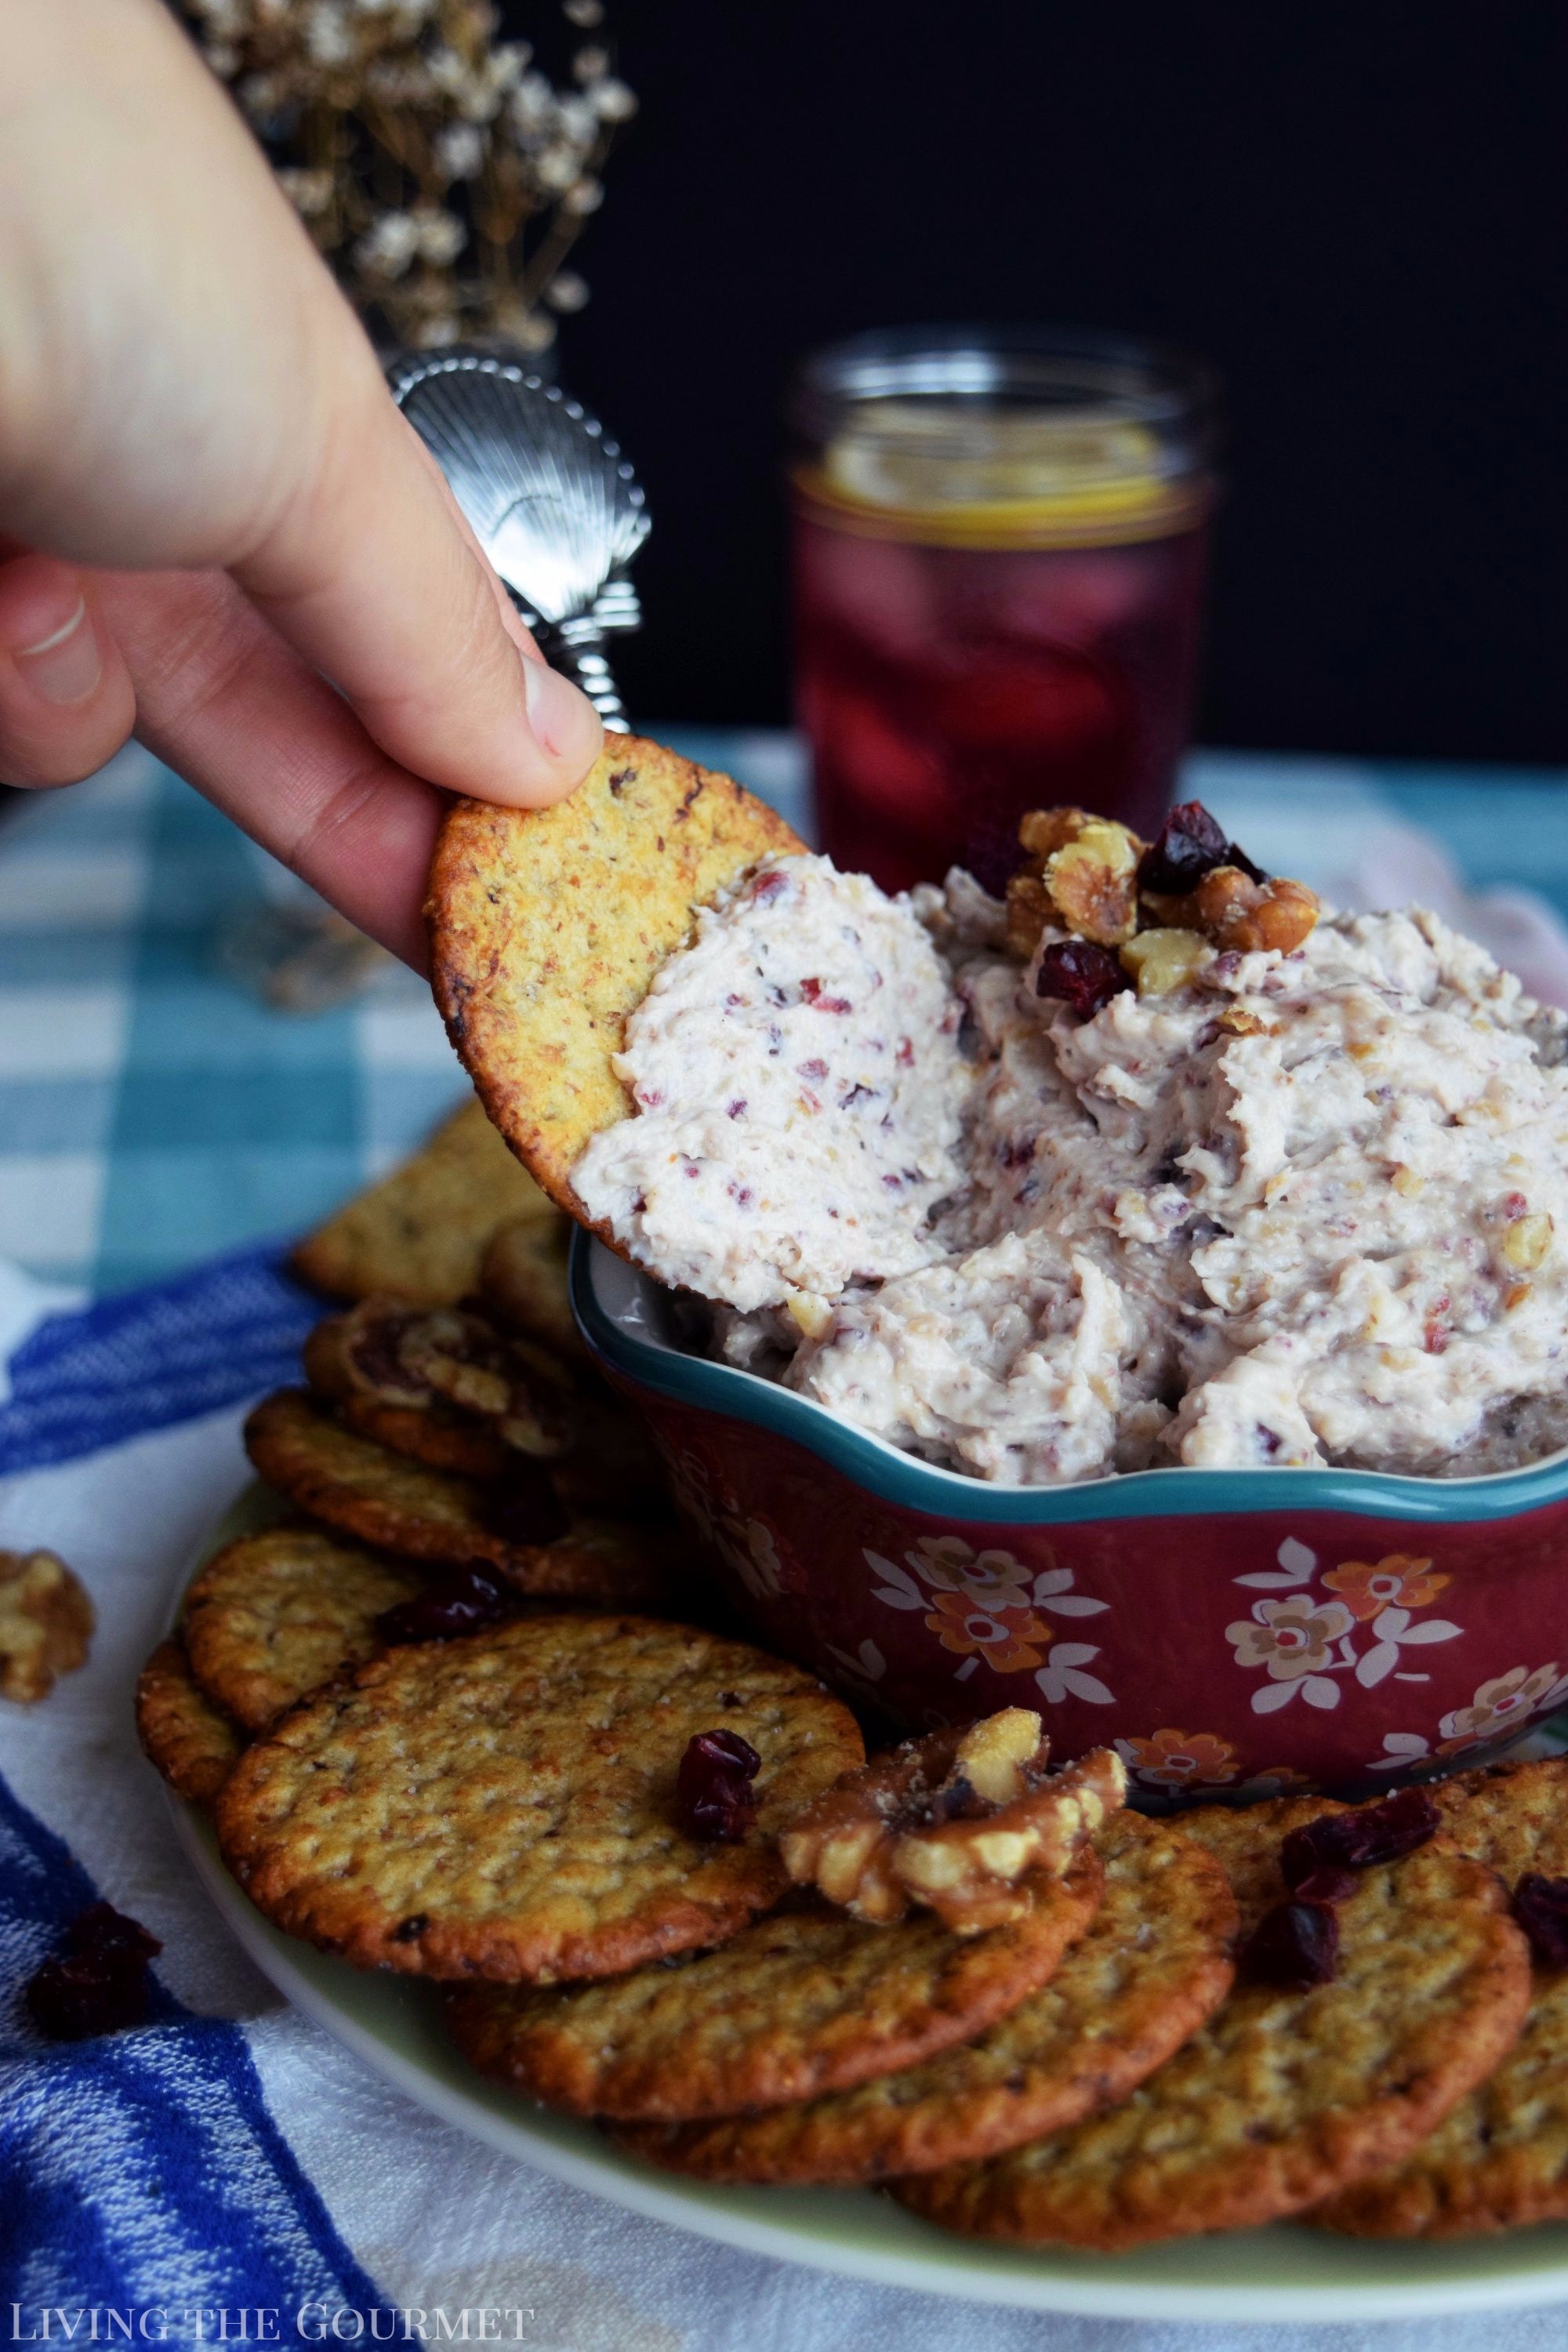 Living the Gourmet: This Cranberry, Walnut and Honey Spread is a perfect send off to summer. It is a light, delicious spread that evokes the flavors of the Fall season. #BetterWithBreton #ad